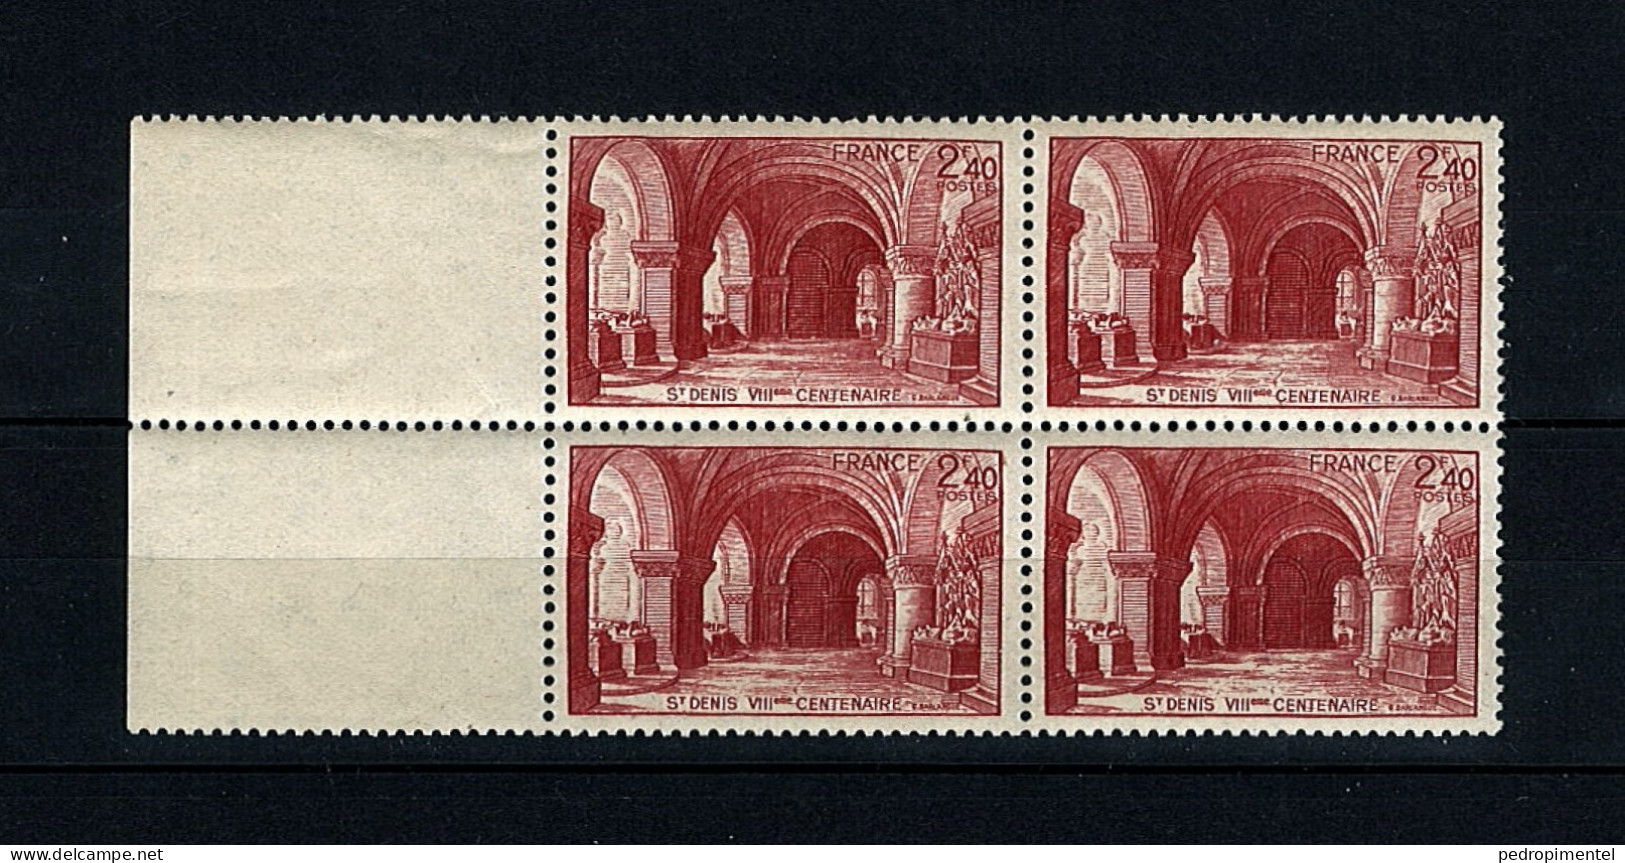 France Stamps | 1944 | The 800th Anniversay Of St Denis  | MNH #648 - Ongebruikt